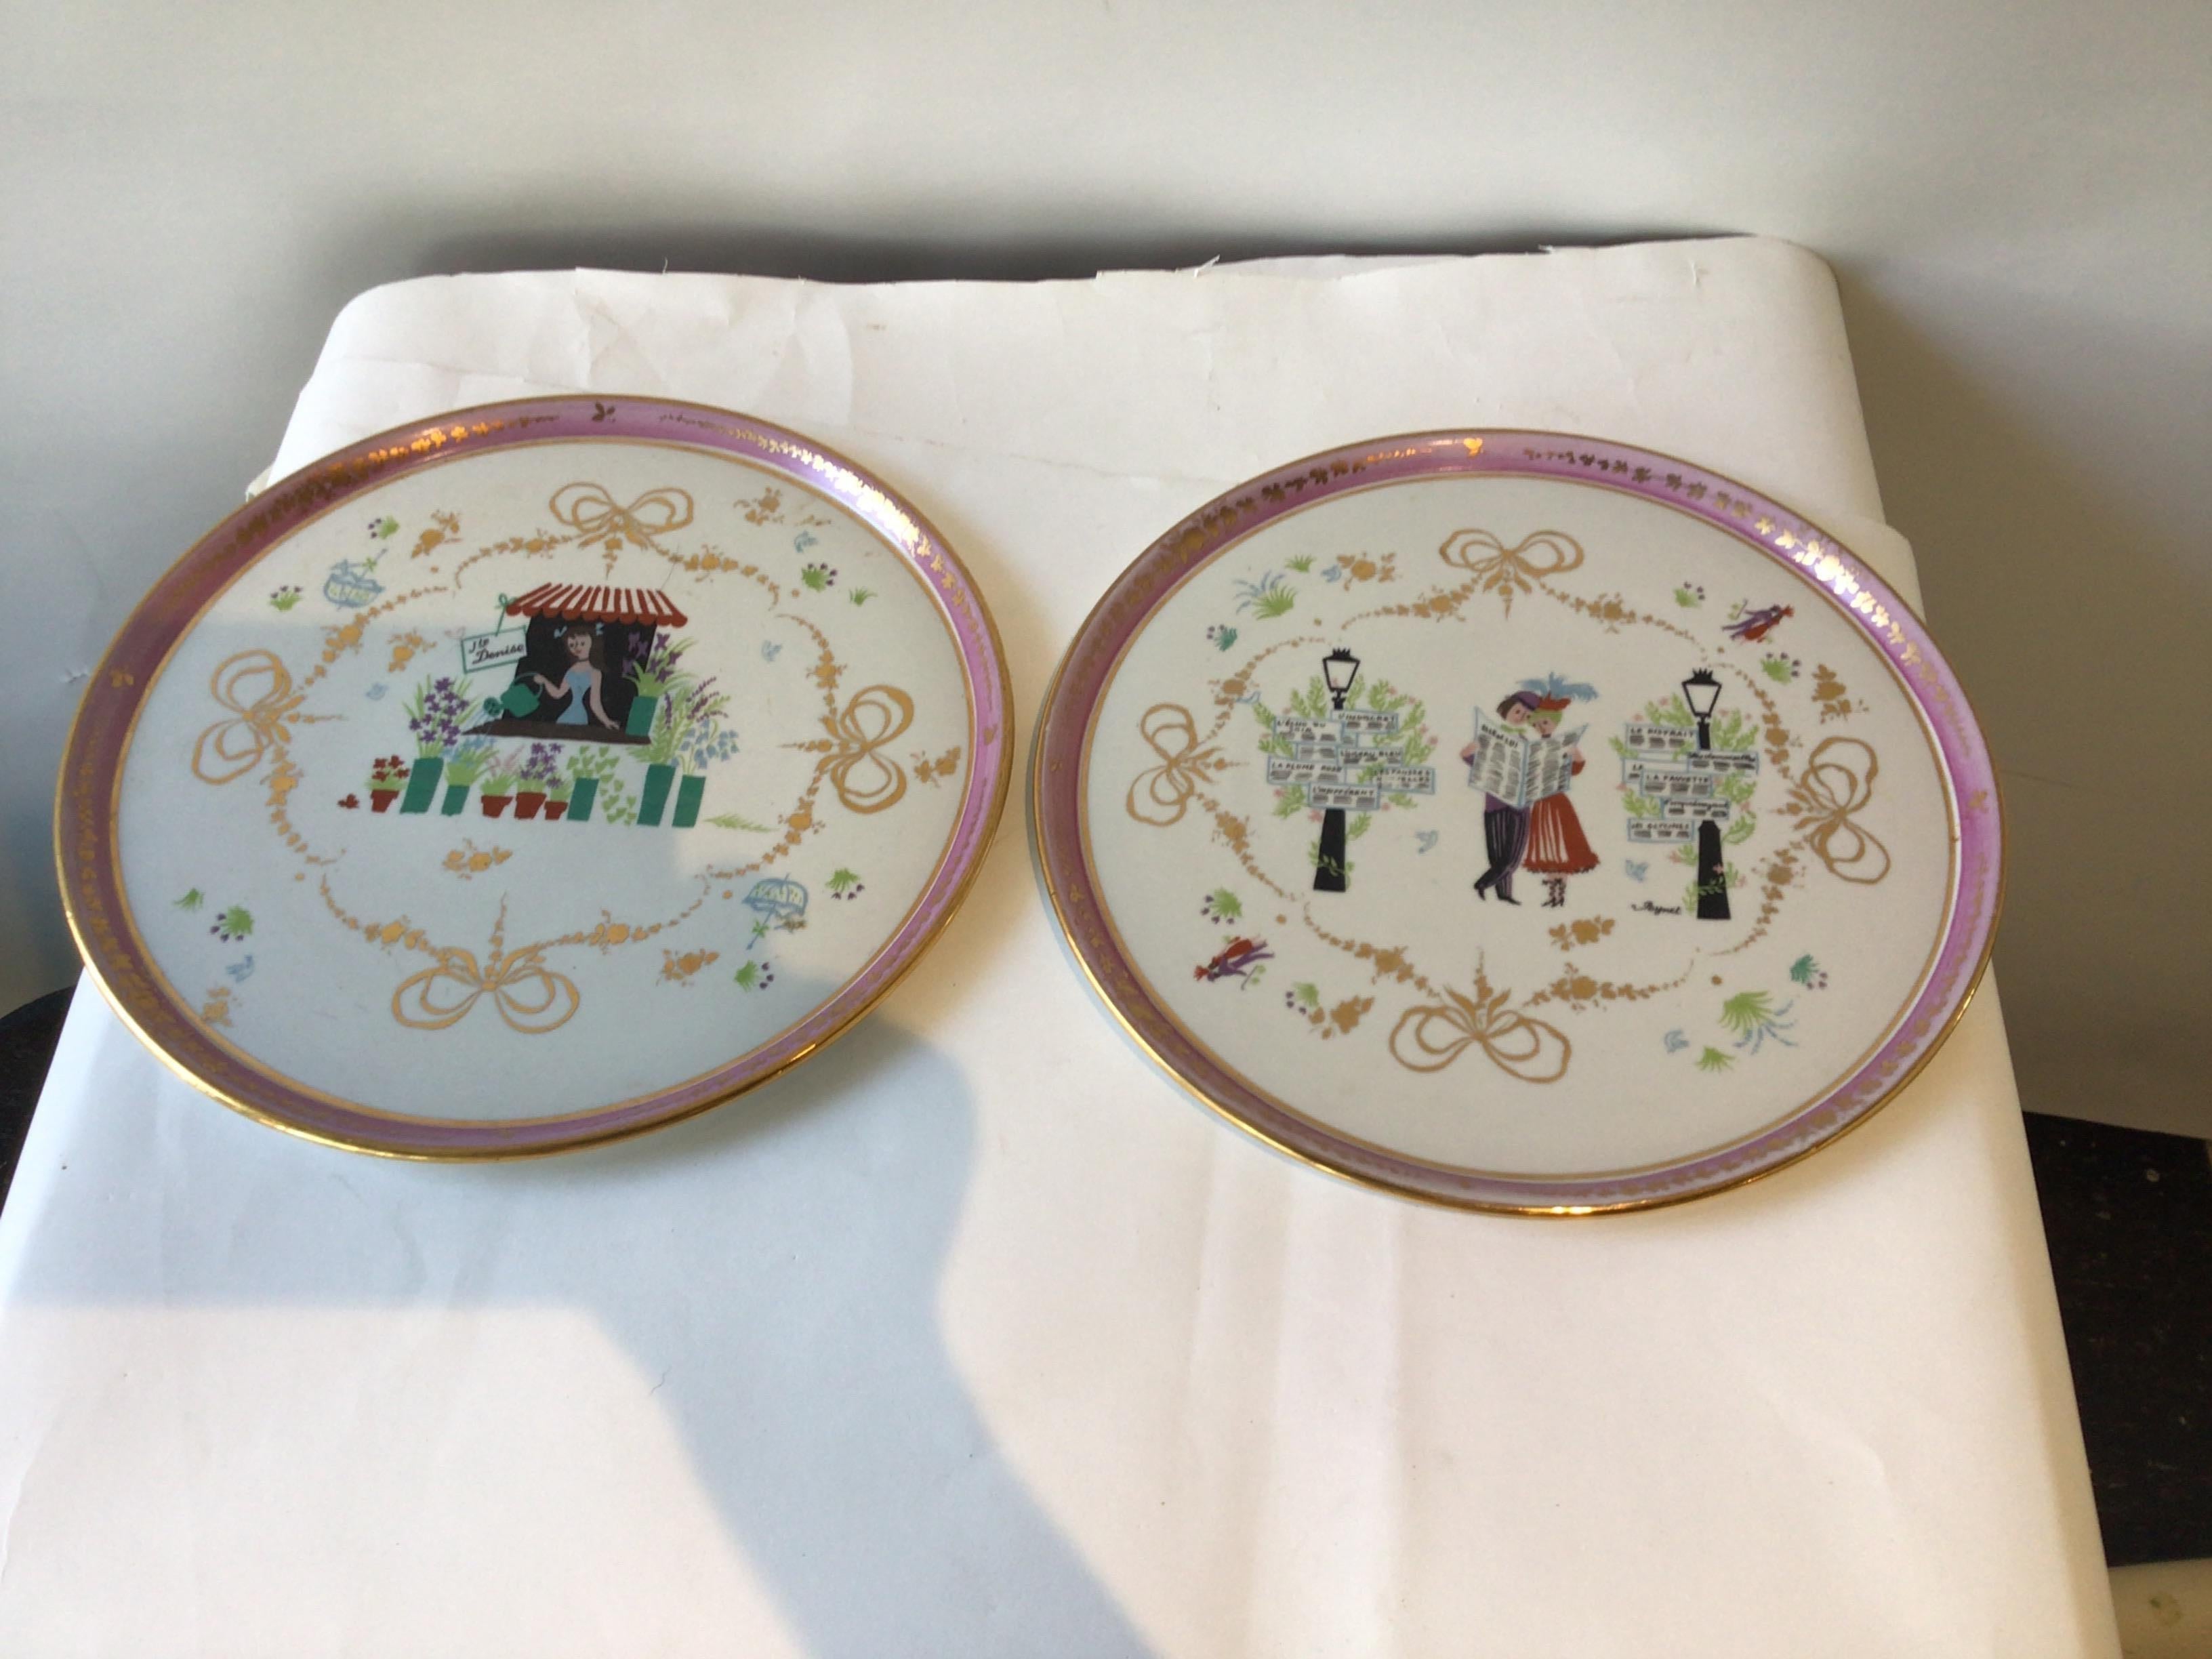 Pair of Raymond Peynet Limoges serving dishes. Made in France for Saks Fifth Avenue.